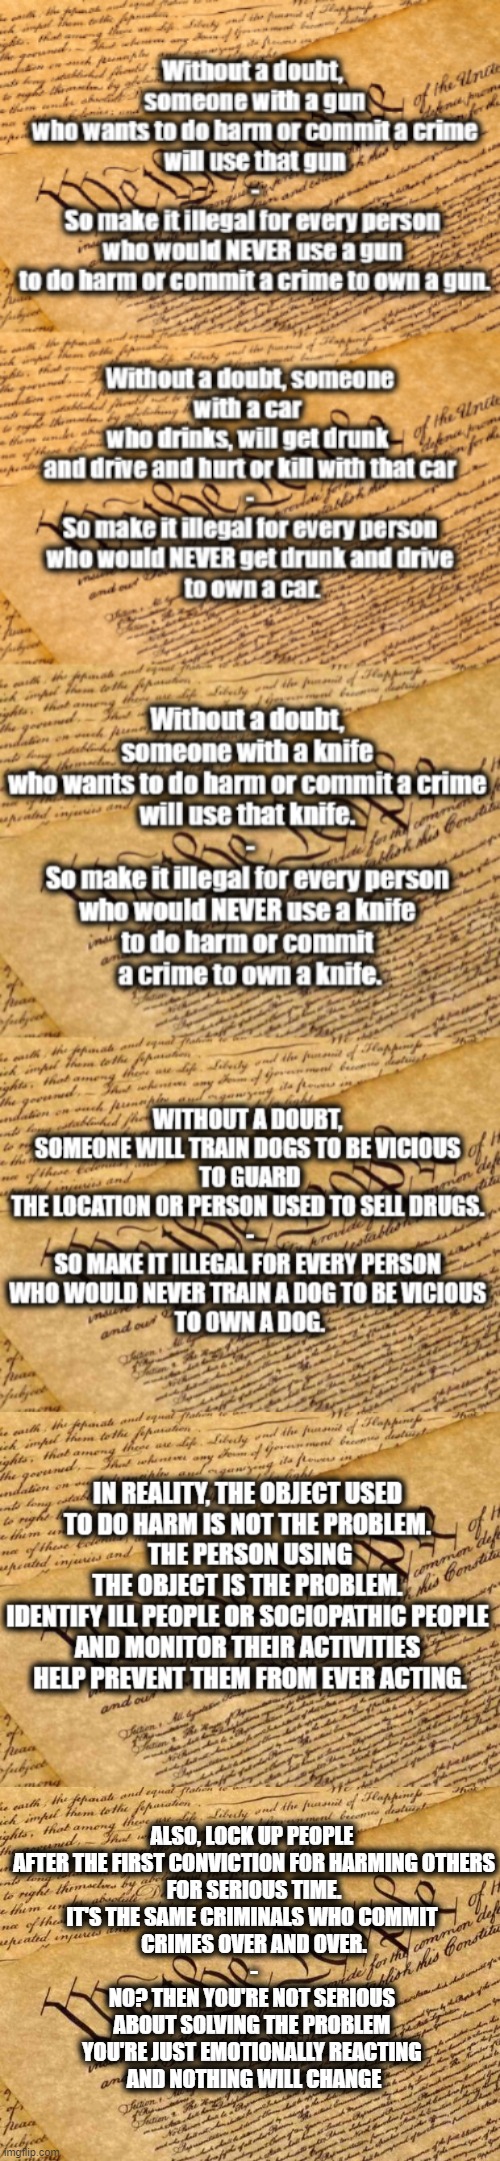 You Want Serious Change? | ALSO, LOCK UP PEOPLE 
AFTER THE FIRST CONVICTION FOR HARMING OTHERS
FOR SERIOUS TIME.
IT'S THE SAME CRIMINALS WHO COMMIT 
CRIMES OVER AND OVER.
-
NO? THEN YOU'RE NOT SERIOUS 
ABOUT SOLVING THE PROBLEM 
YOU'RE JUST EMOTIONALLY REACTING 
AND NOTHING WILL CHANGE | image tagged in constitution,changes,guns | made w/ Imgflip meme maker